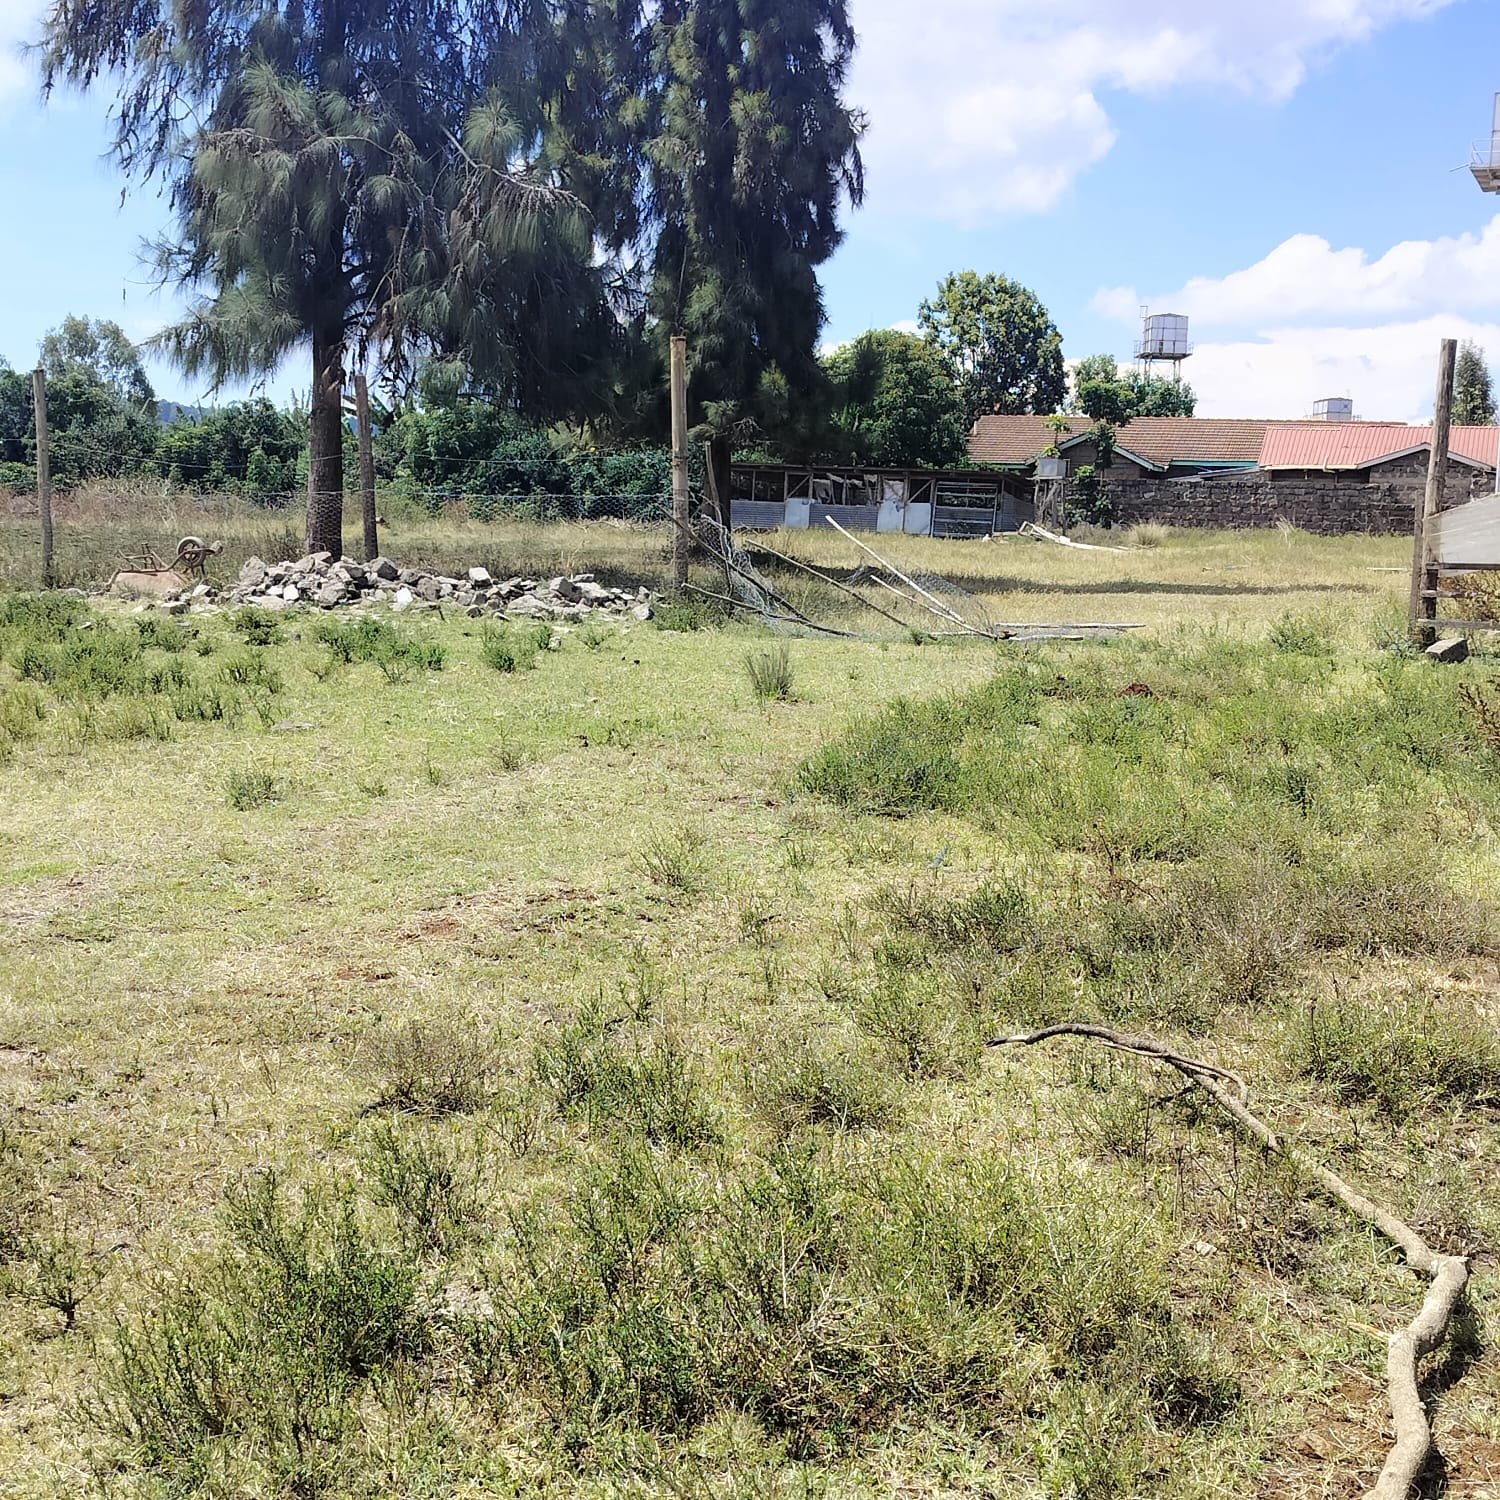 1/8 ACRE LAND FOR SALE IN KERARAPON 1/4 ACRE LAND FOR SALE IN KERARAPON 1/2 ACRE LAND FOR SALE IN KERARAPON 1 ACRE LAND FOR SALE IN KERARAPON, Karen, Ngong Musilli Homes